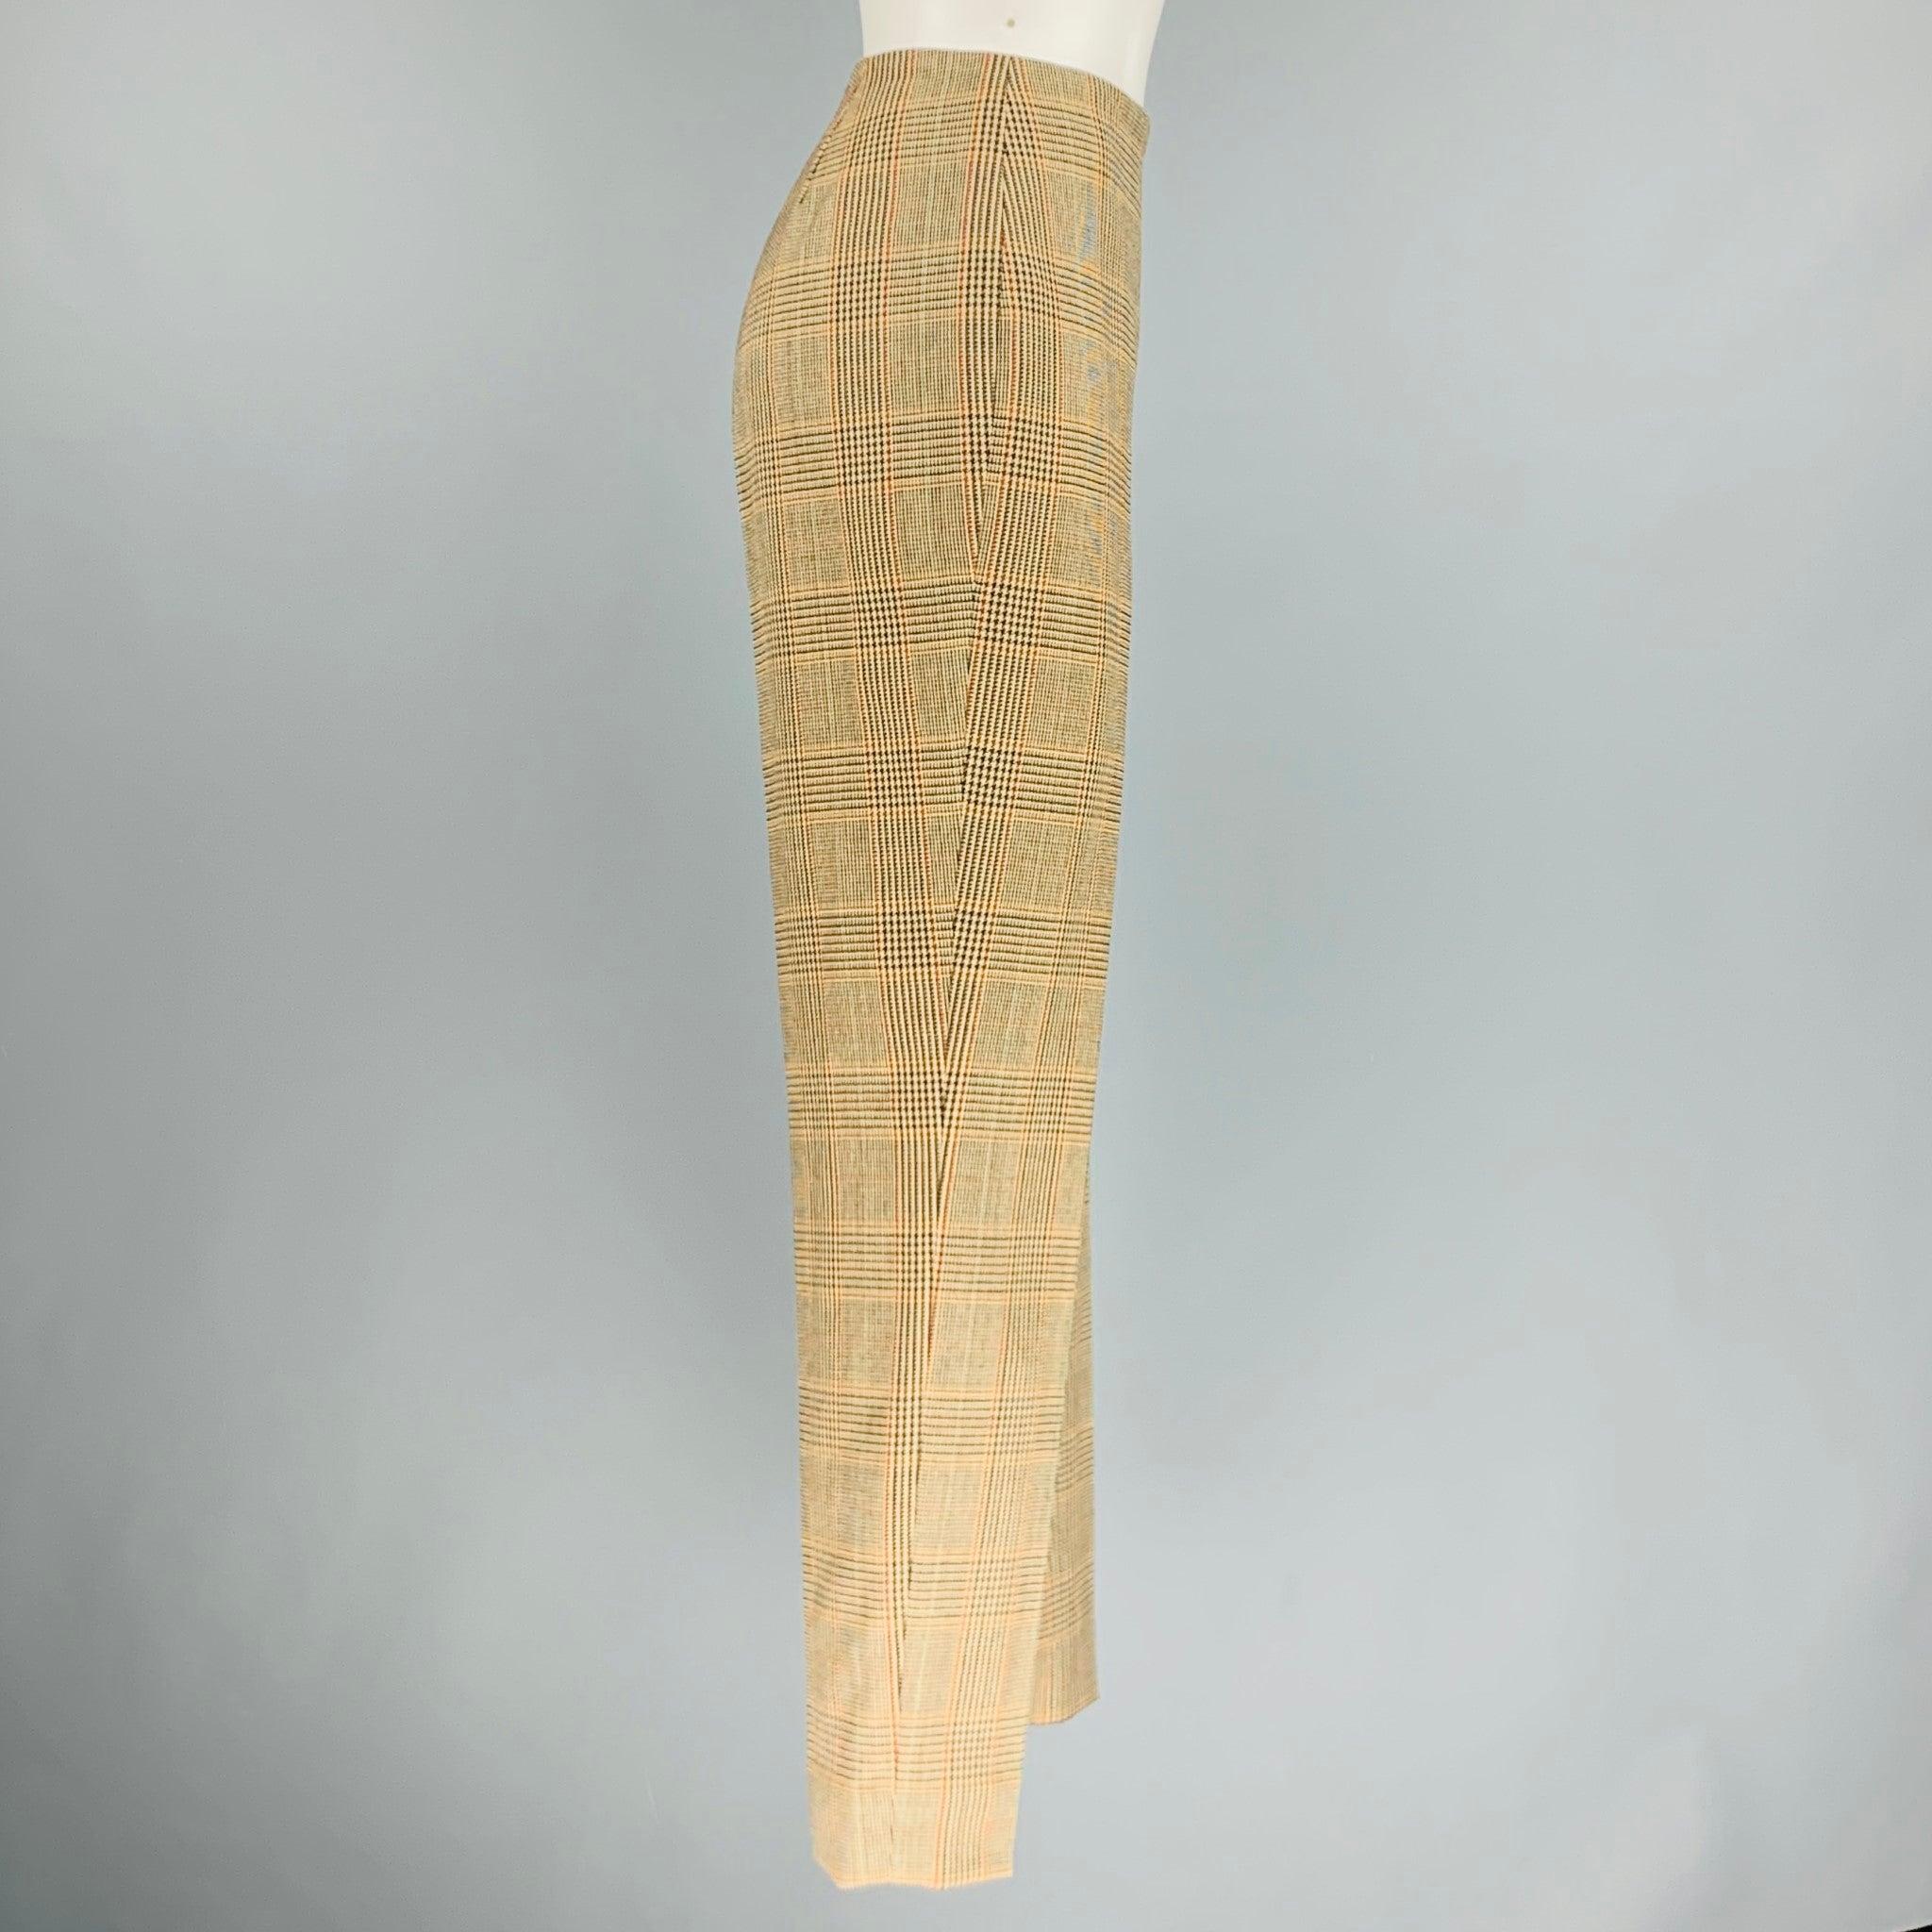 RALPH LAUREN COLLECTION dress pants in a brown and beige wool fabric featuring a glenplaid pattern, high waist, flat front style, narrow legs, and a side zip up closure. Made in USA.Excellent Pre-Owned Condition.  

Marked:   8 

Measurements: 
 